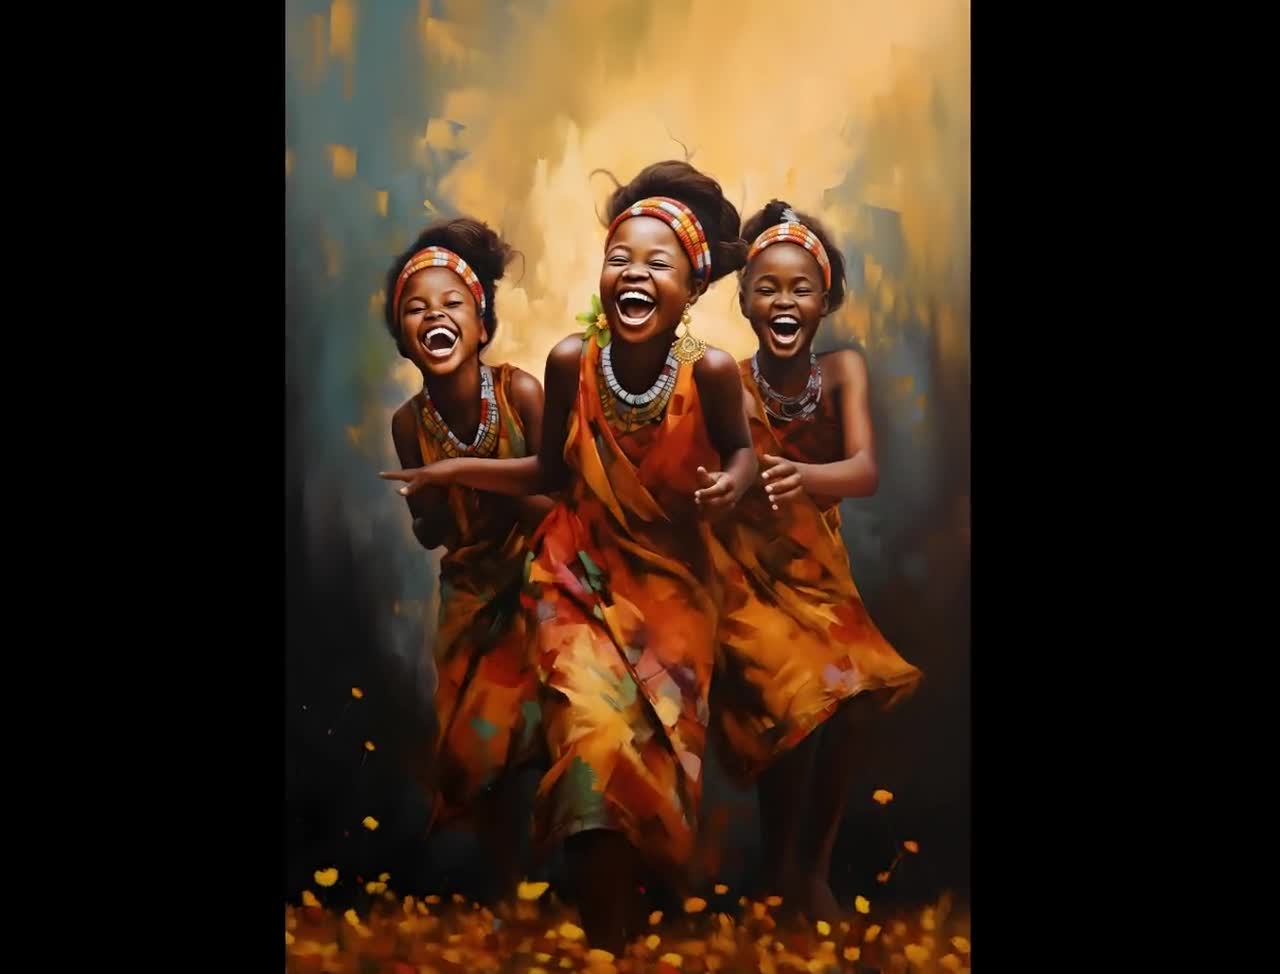 A Triplets Three Afro girl oil painting framed original, African art, Black  Girl Magic decor, African Girl Makeup, inspired, fashion sexy womananime